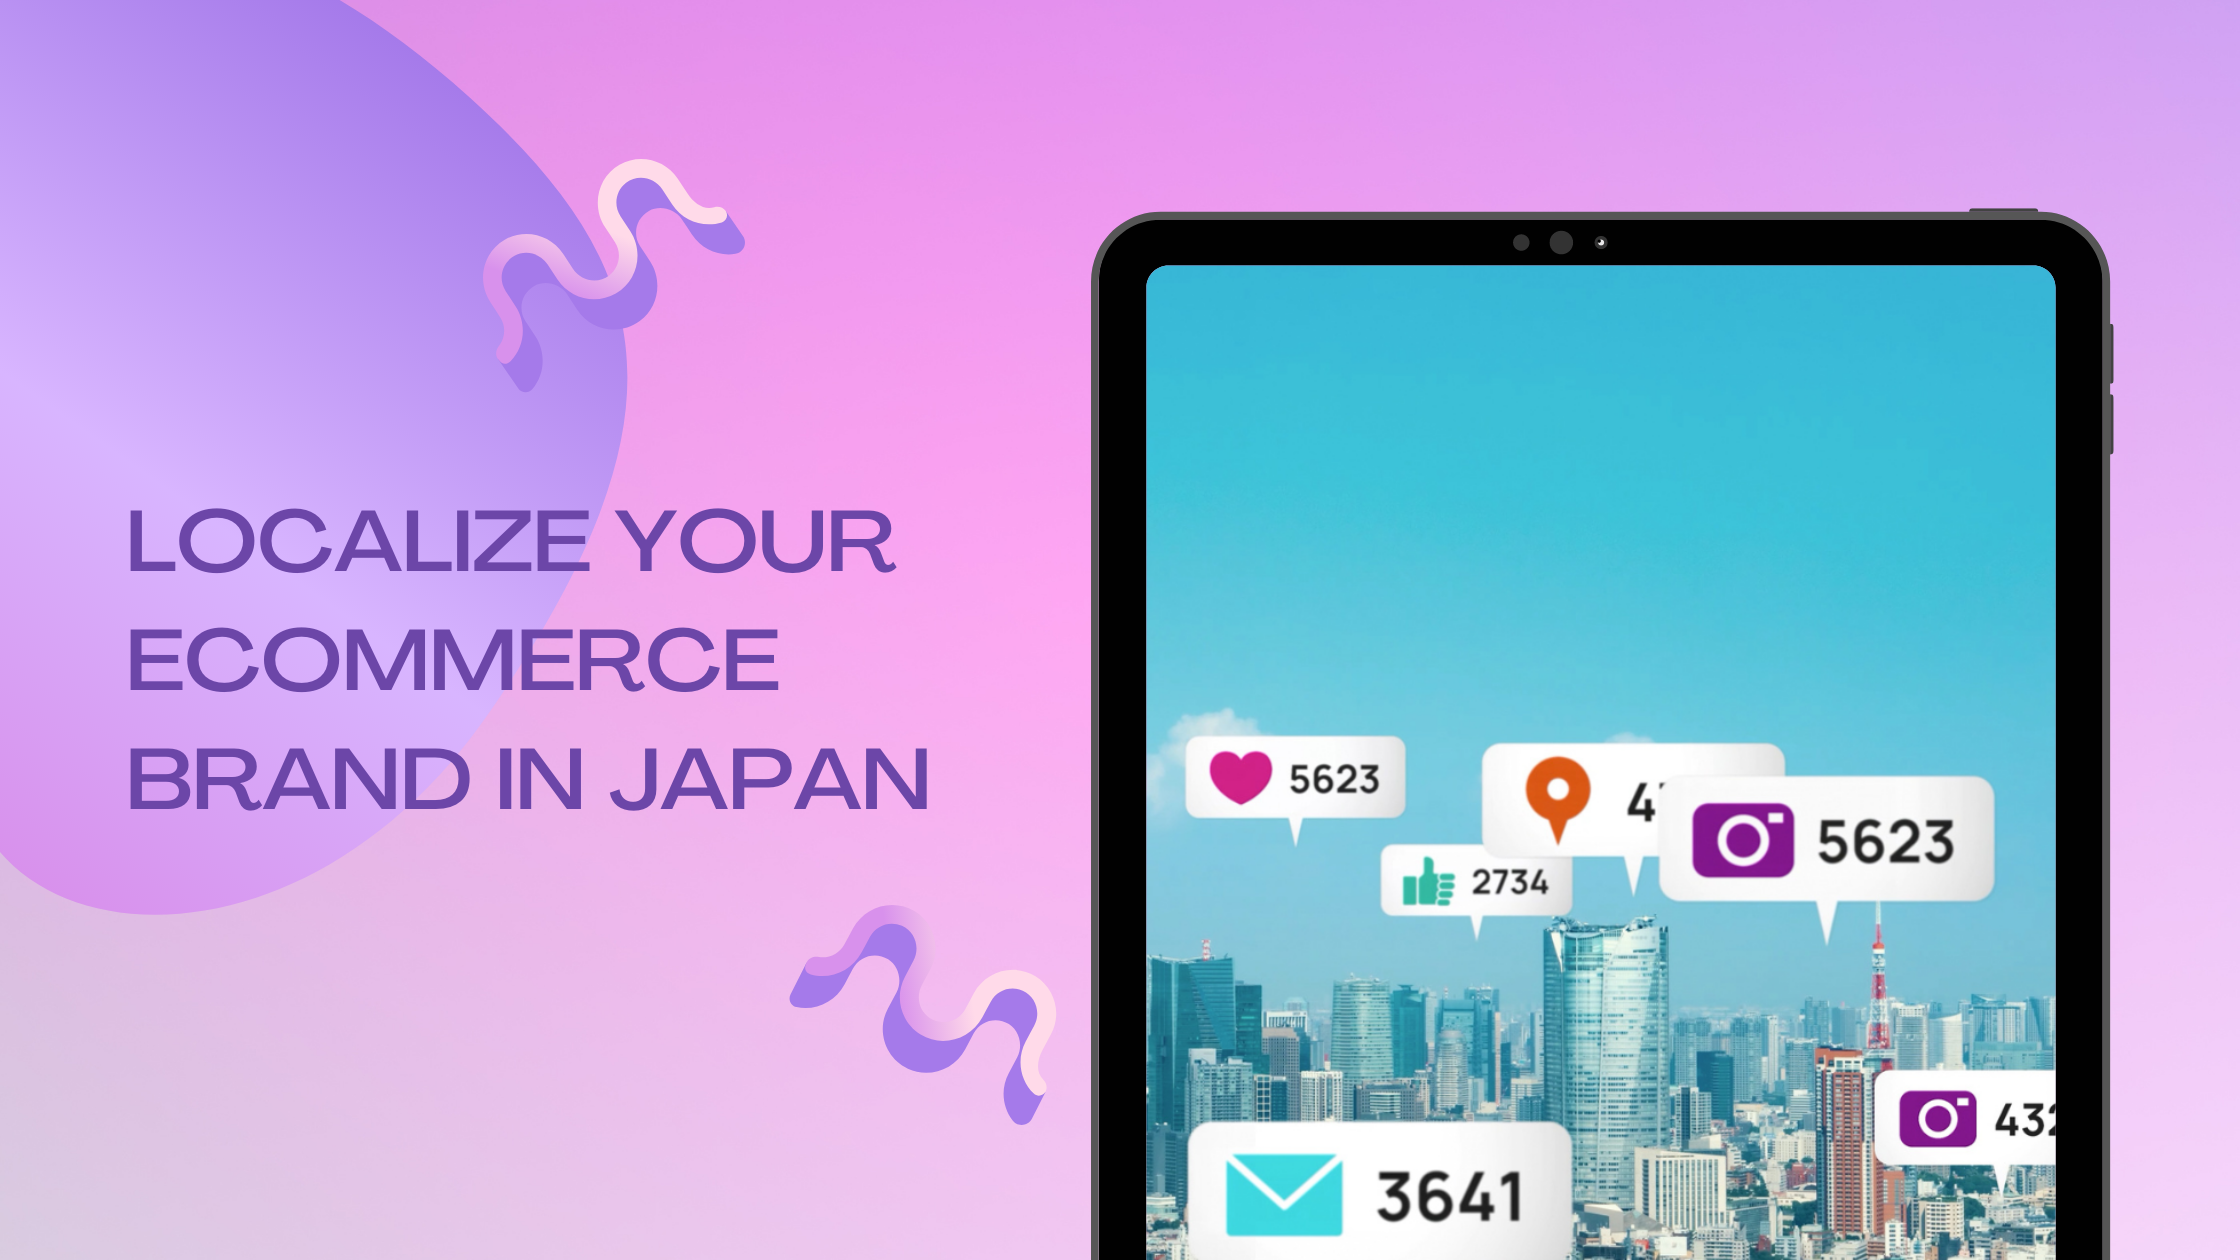 Localize Your Ecommerce Brand in Japan: Top Social Media to Increase Your Brand Presence in Japan